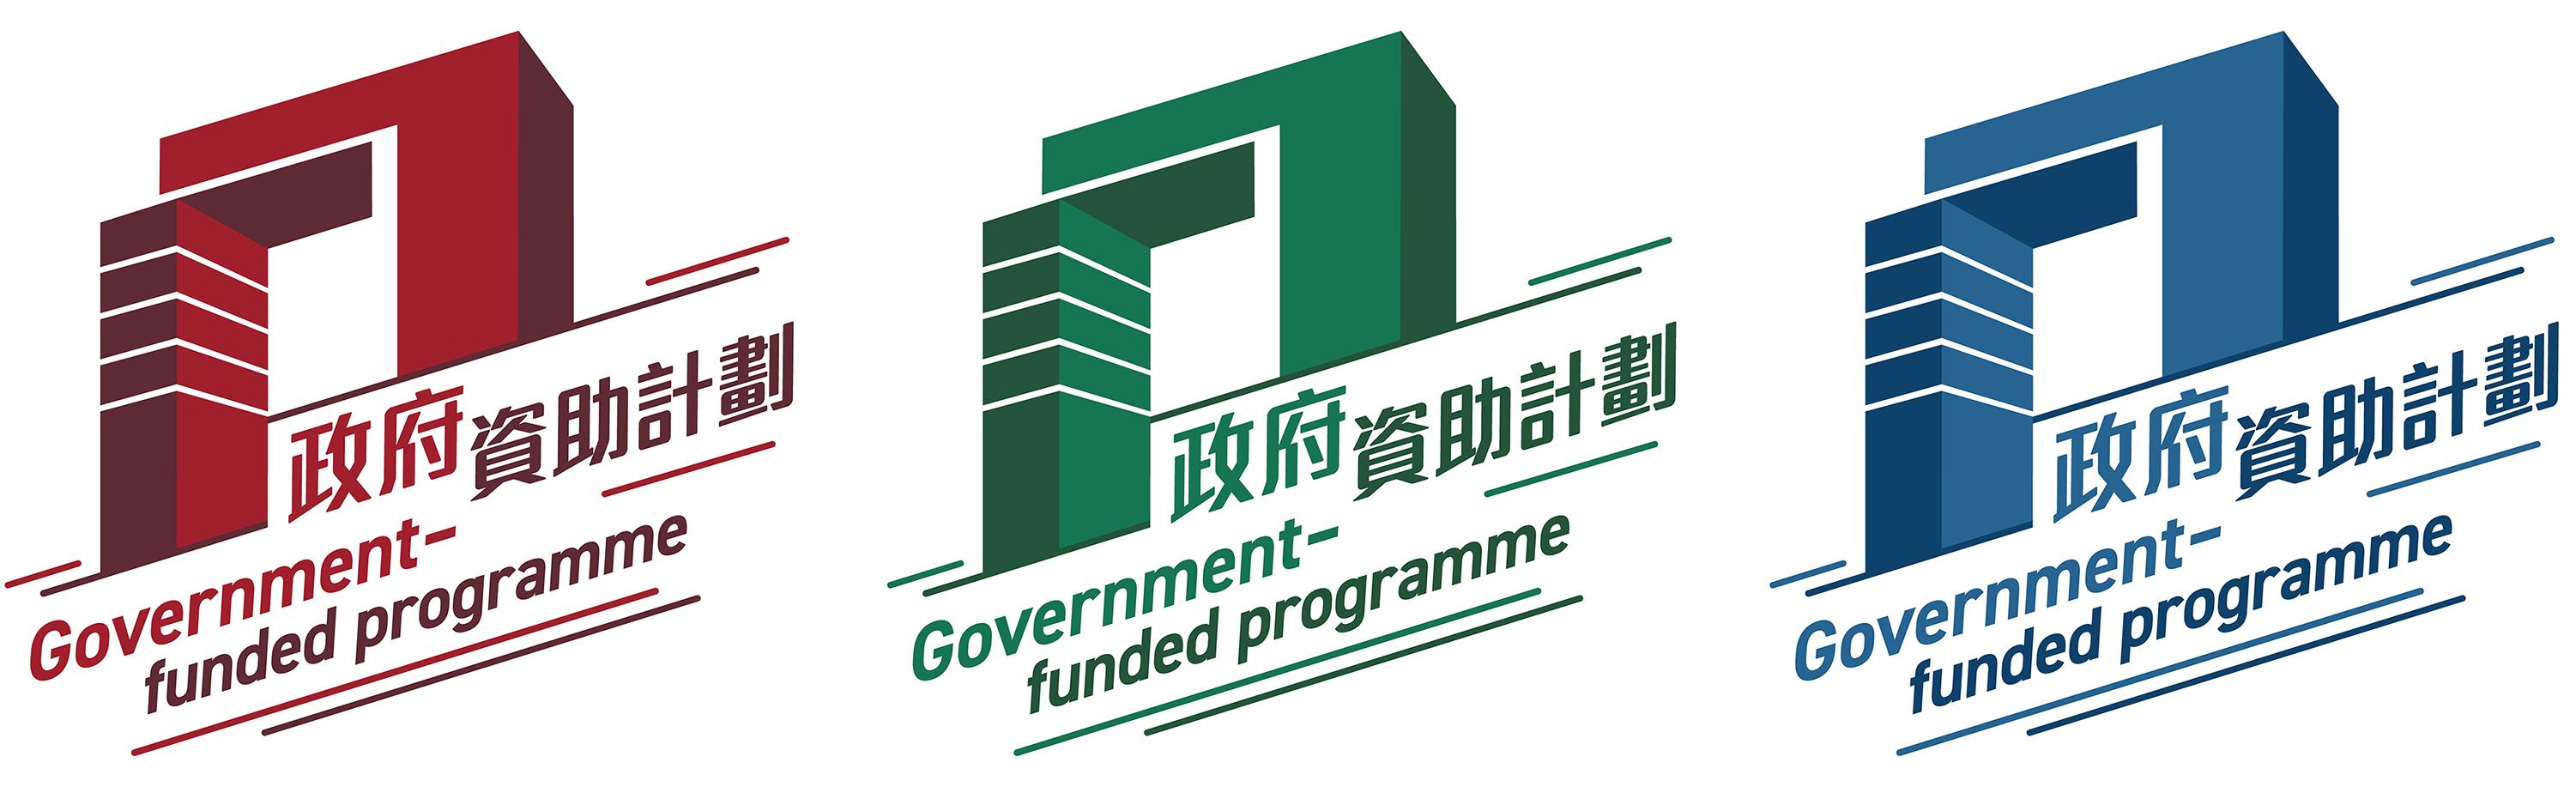 The design of the new promotional logo adopts "door always open", the architectural features of the Central Government Offices, as a primary concept, which brings out the Government's adherence to an open-minded attitude. Its semi-three dimensional design with a subtle tilt features the Government's dynamism and its proactive approach to addressing the diverse needs of the public. The logo is available in red, green and blue versions.